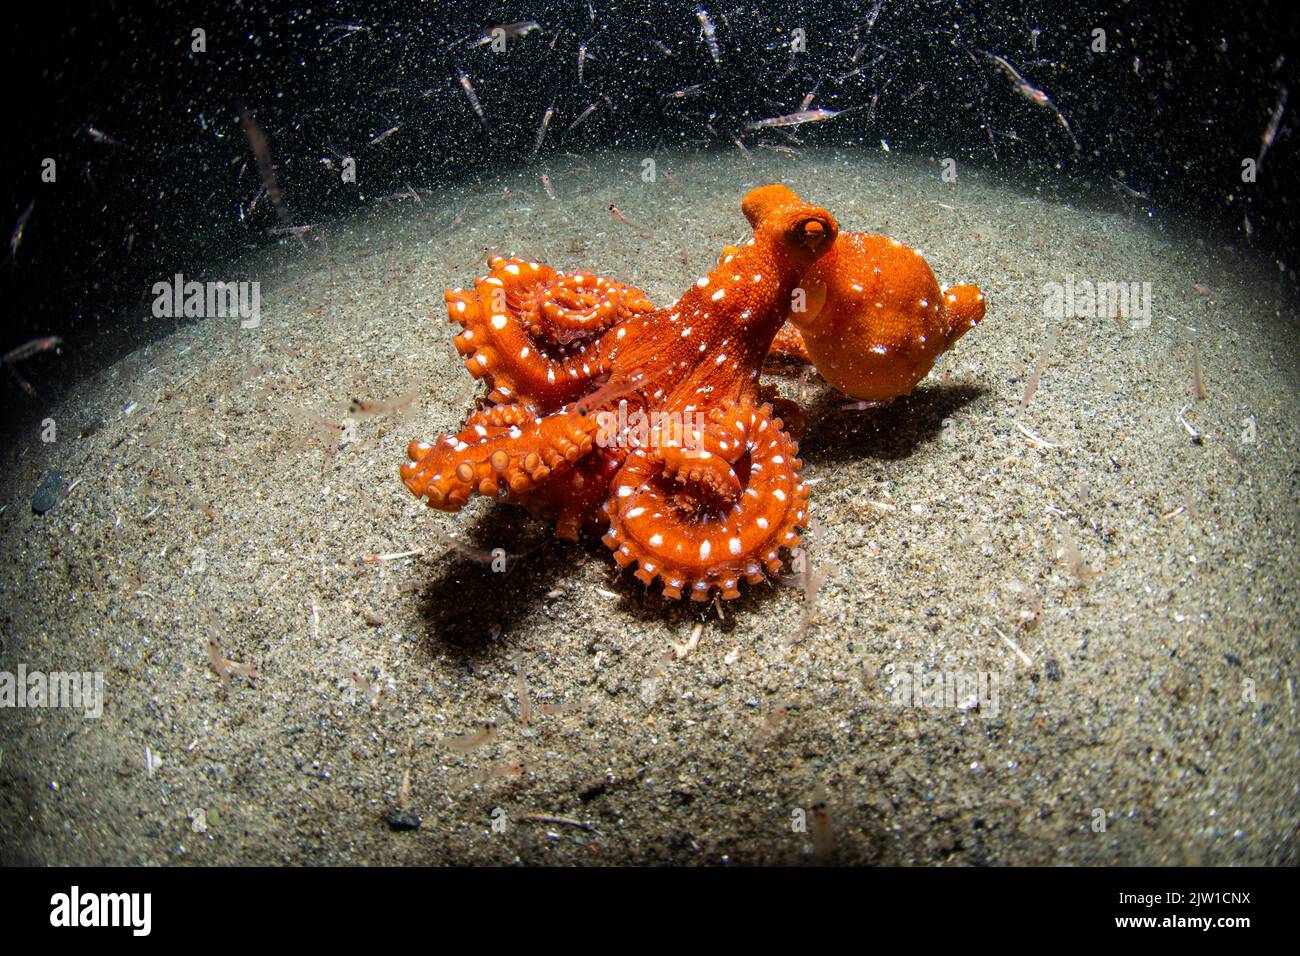 octopus hunting on the sand at night with shrimps Stock Photo